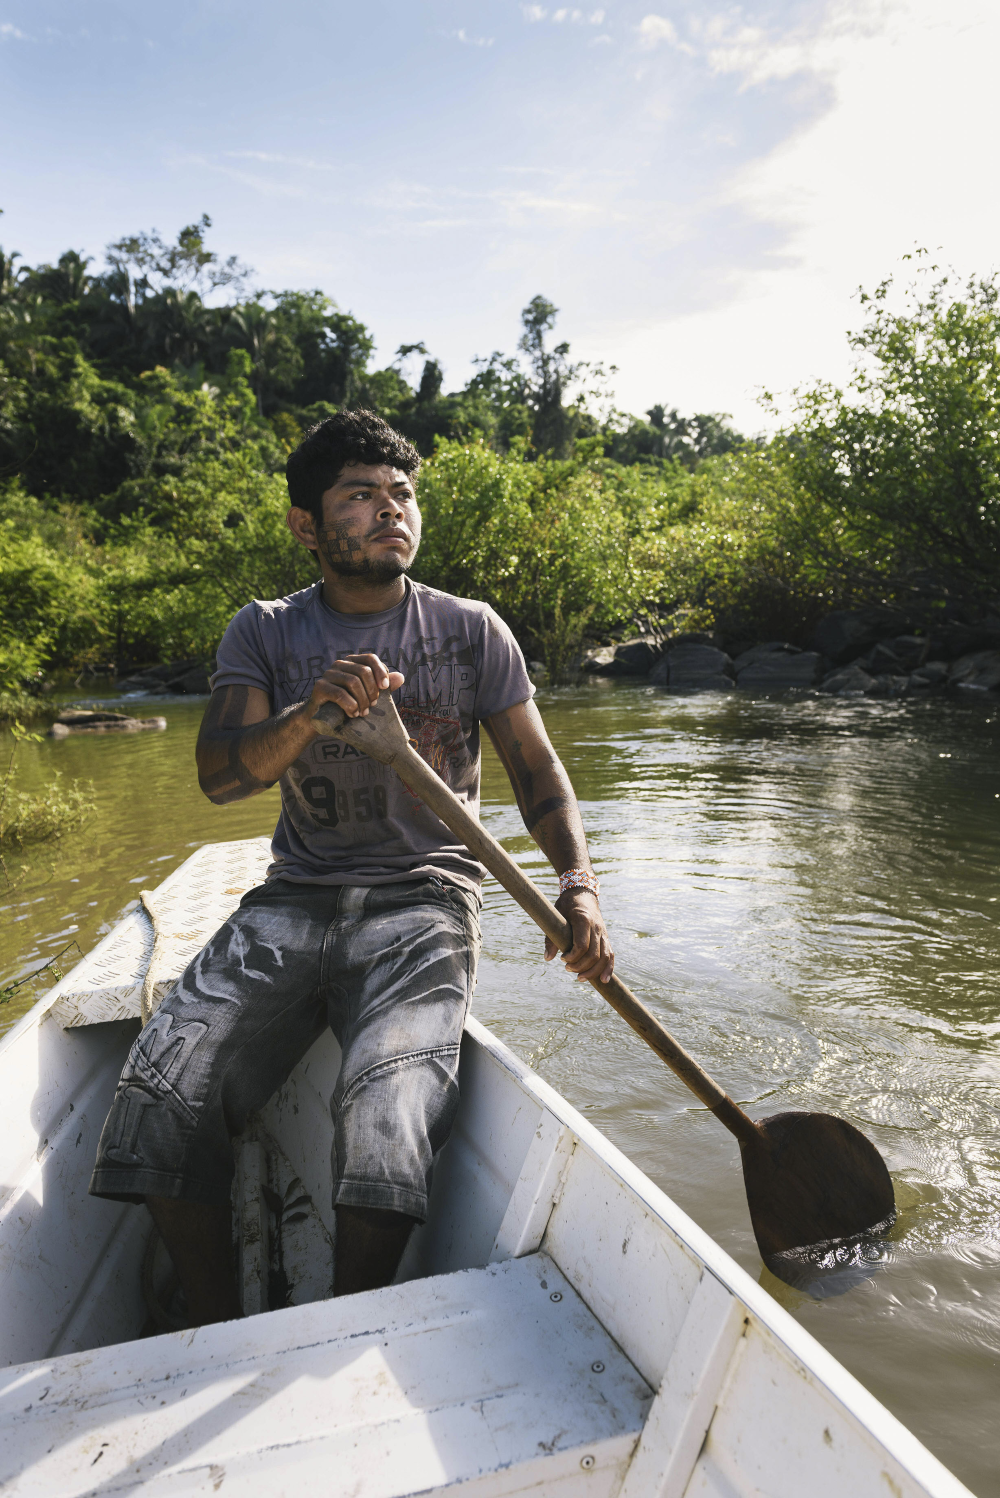 A man paddles a small boat on the Amazon river.